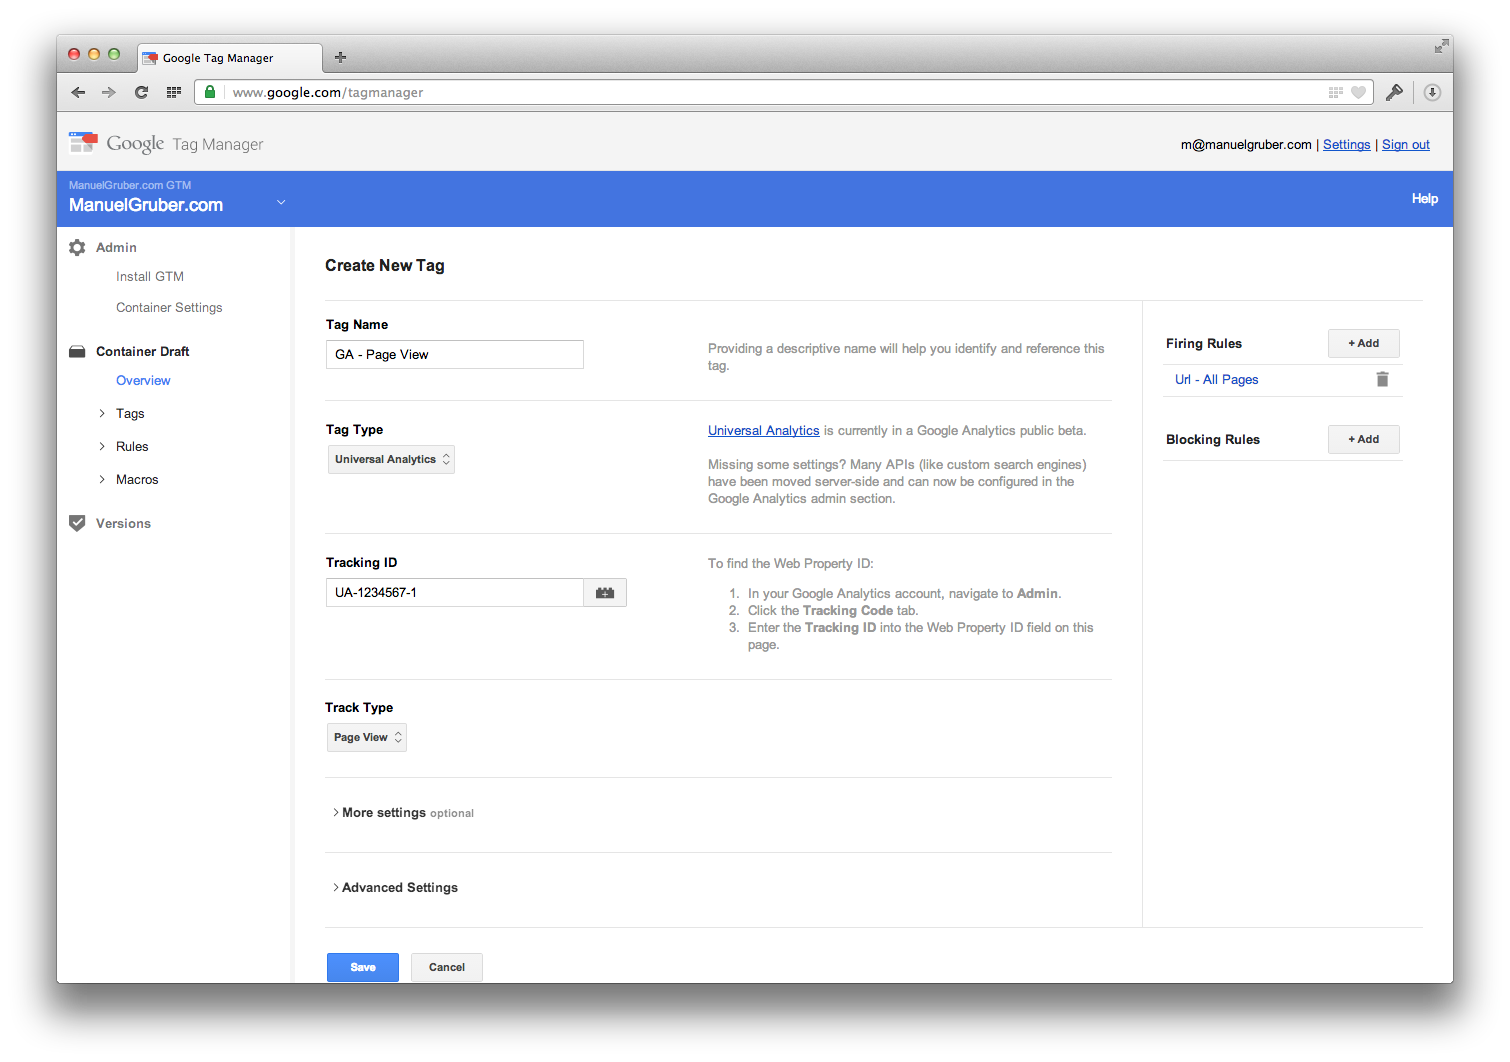 Google Tag Manager - Google Analytics Page View